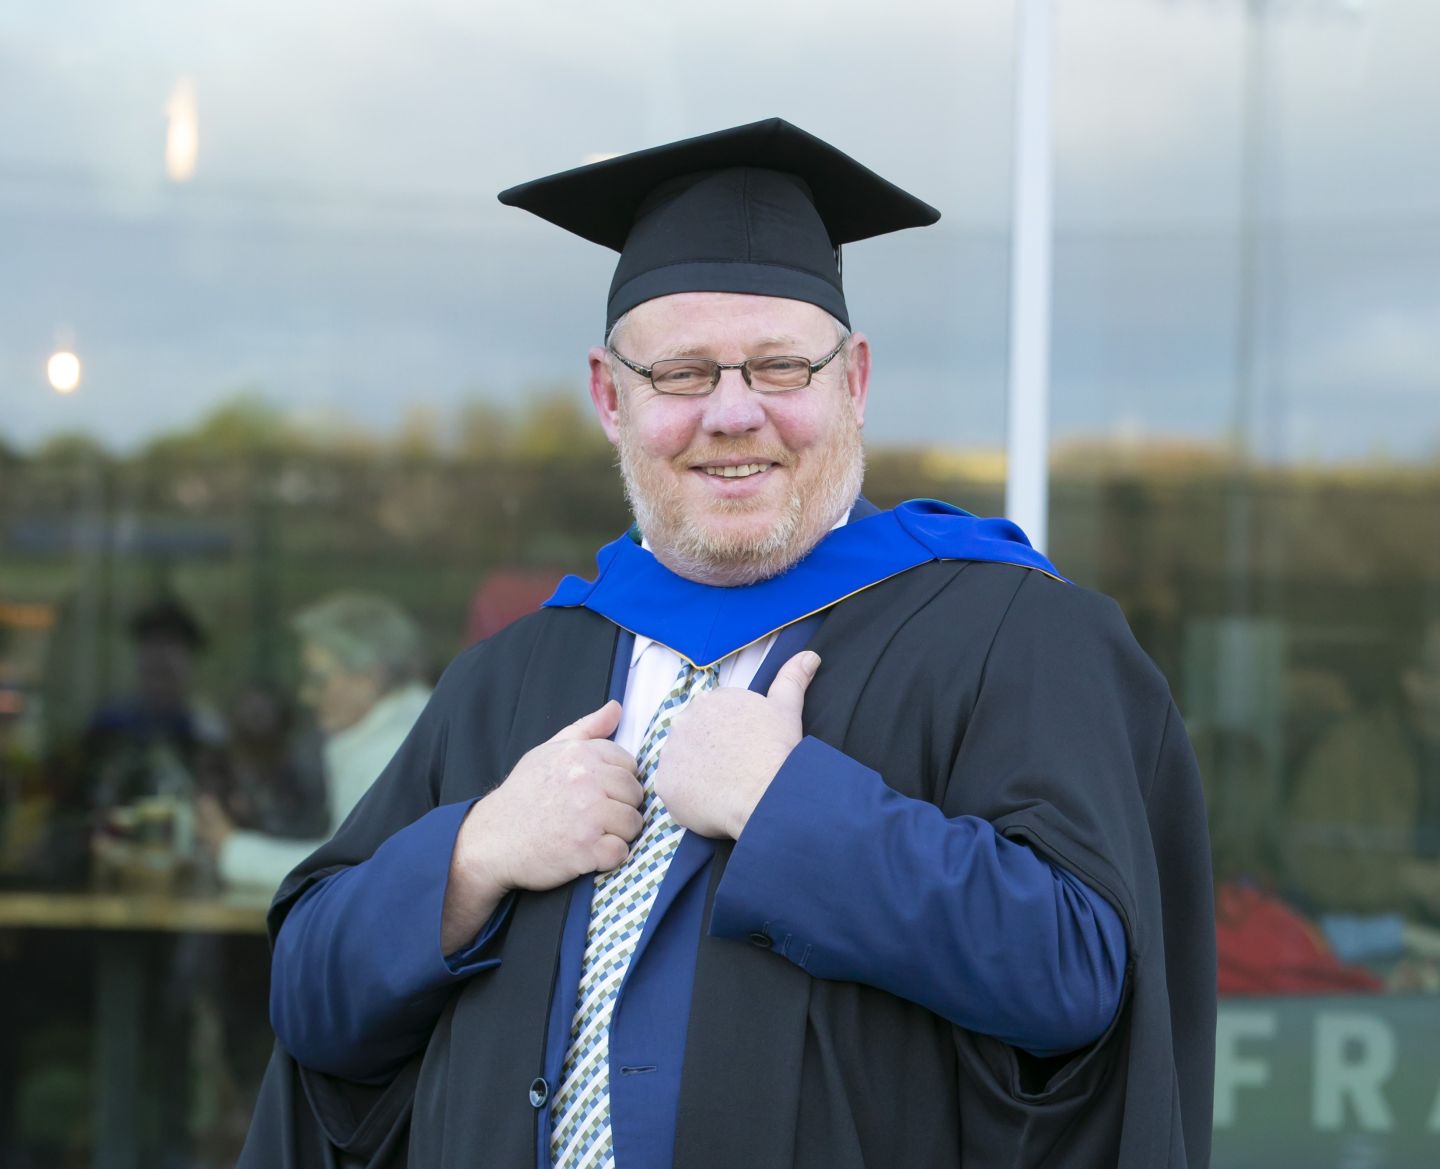 Paul holds Waterford and SETU Master of Science degree in his pocket